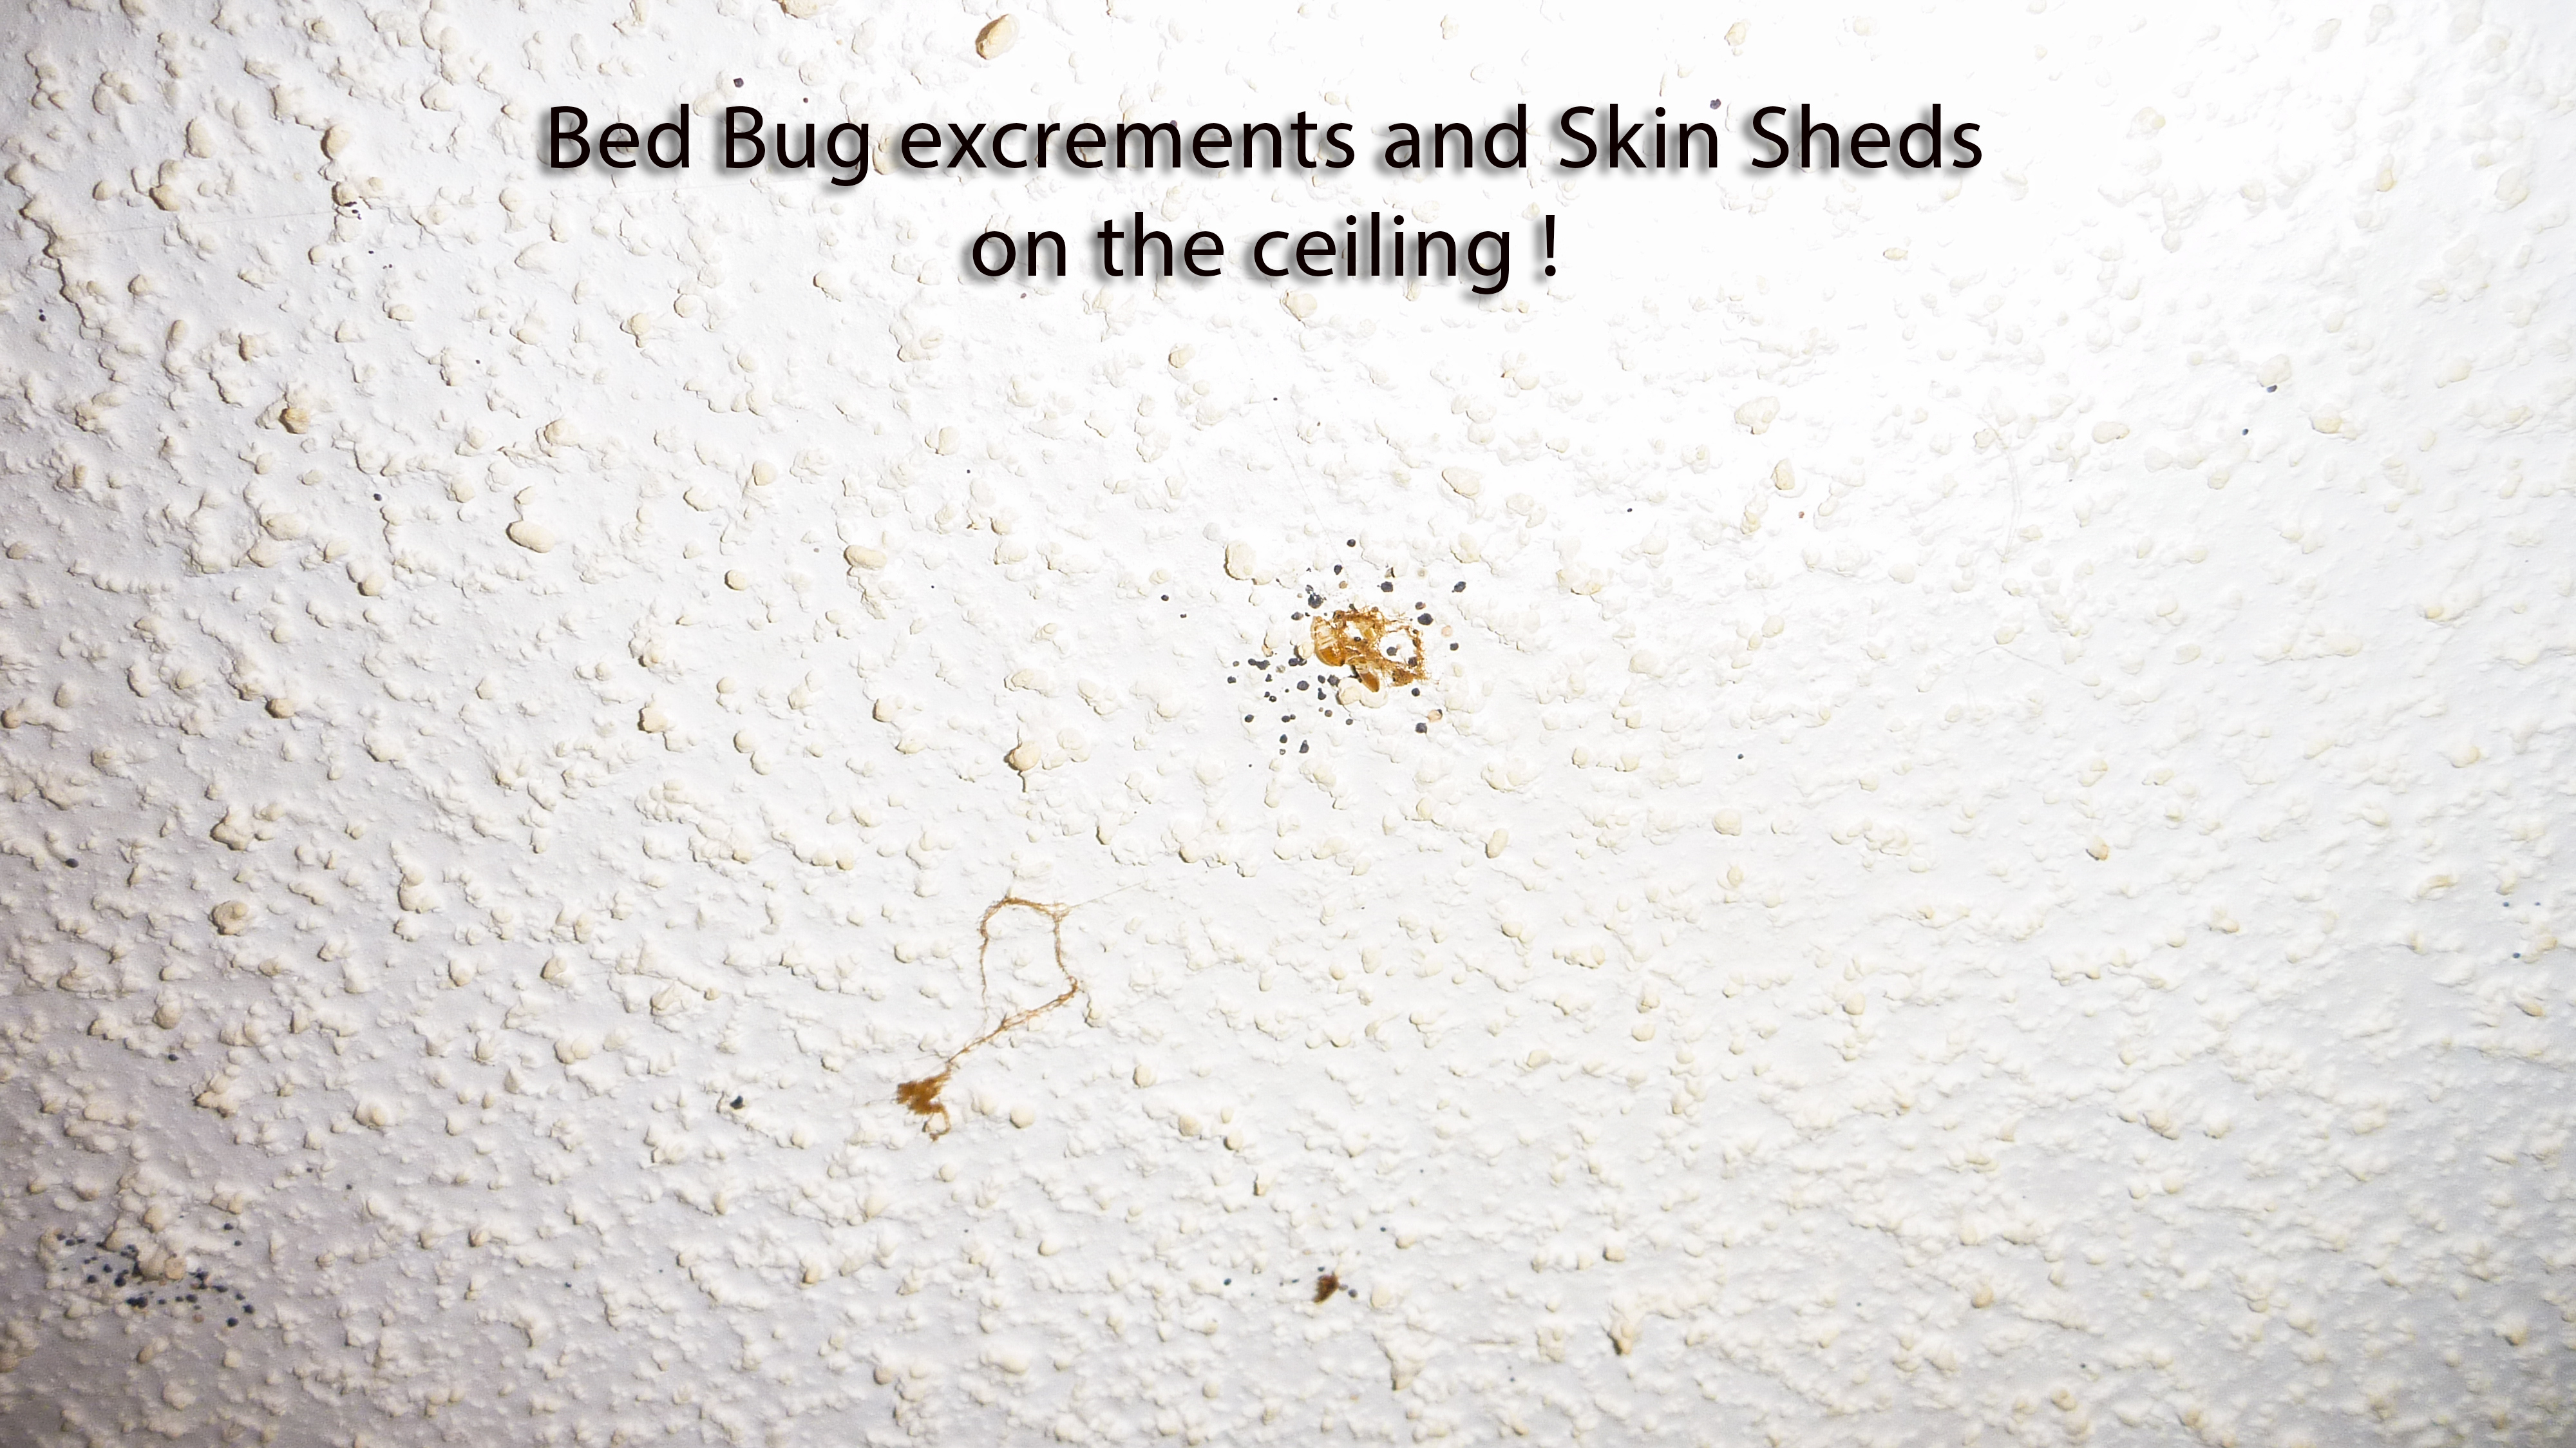 Bed Bugs Skin Sheds and Excrements on the Ceiling: